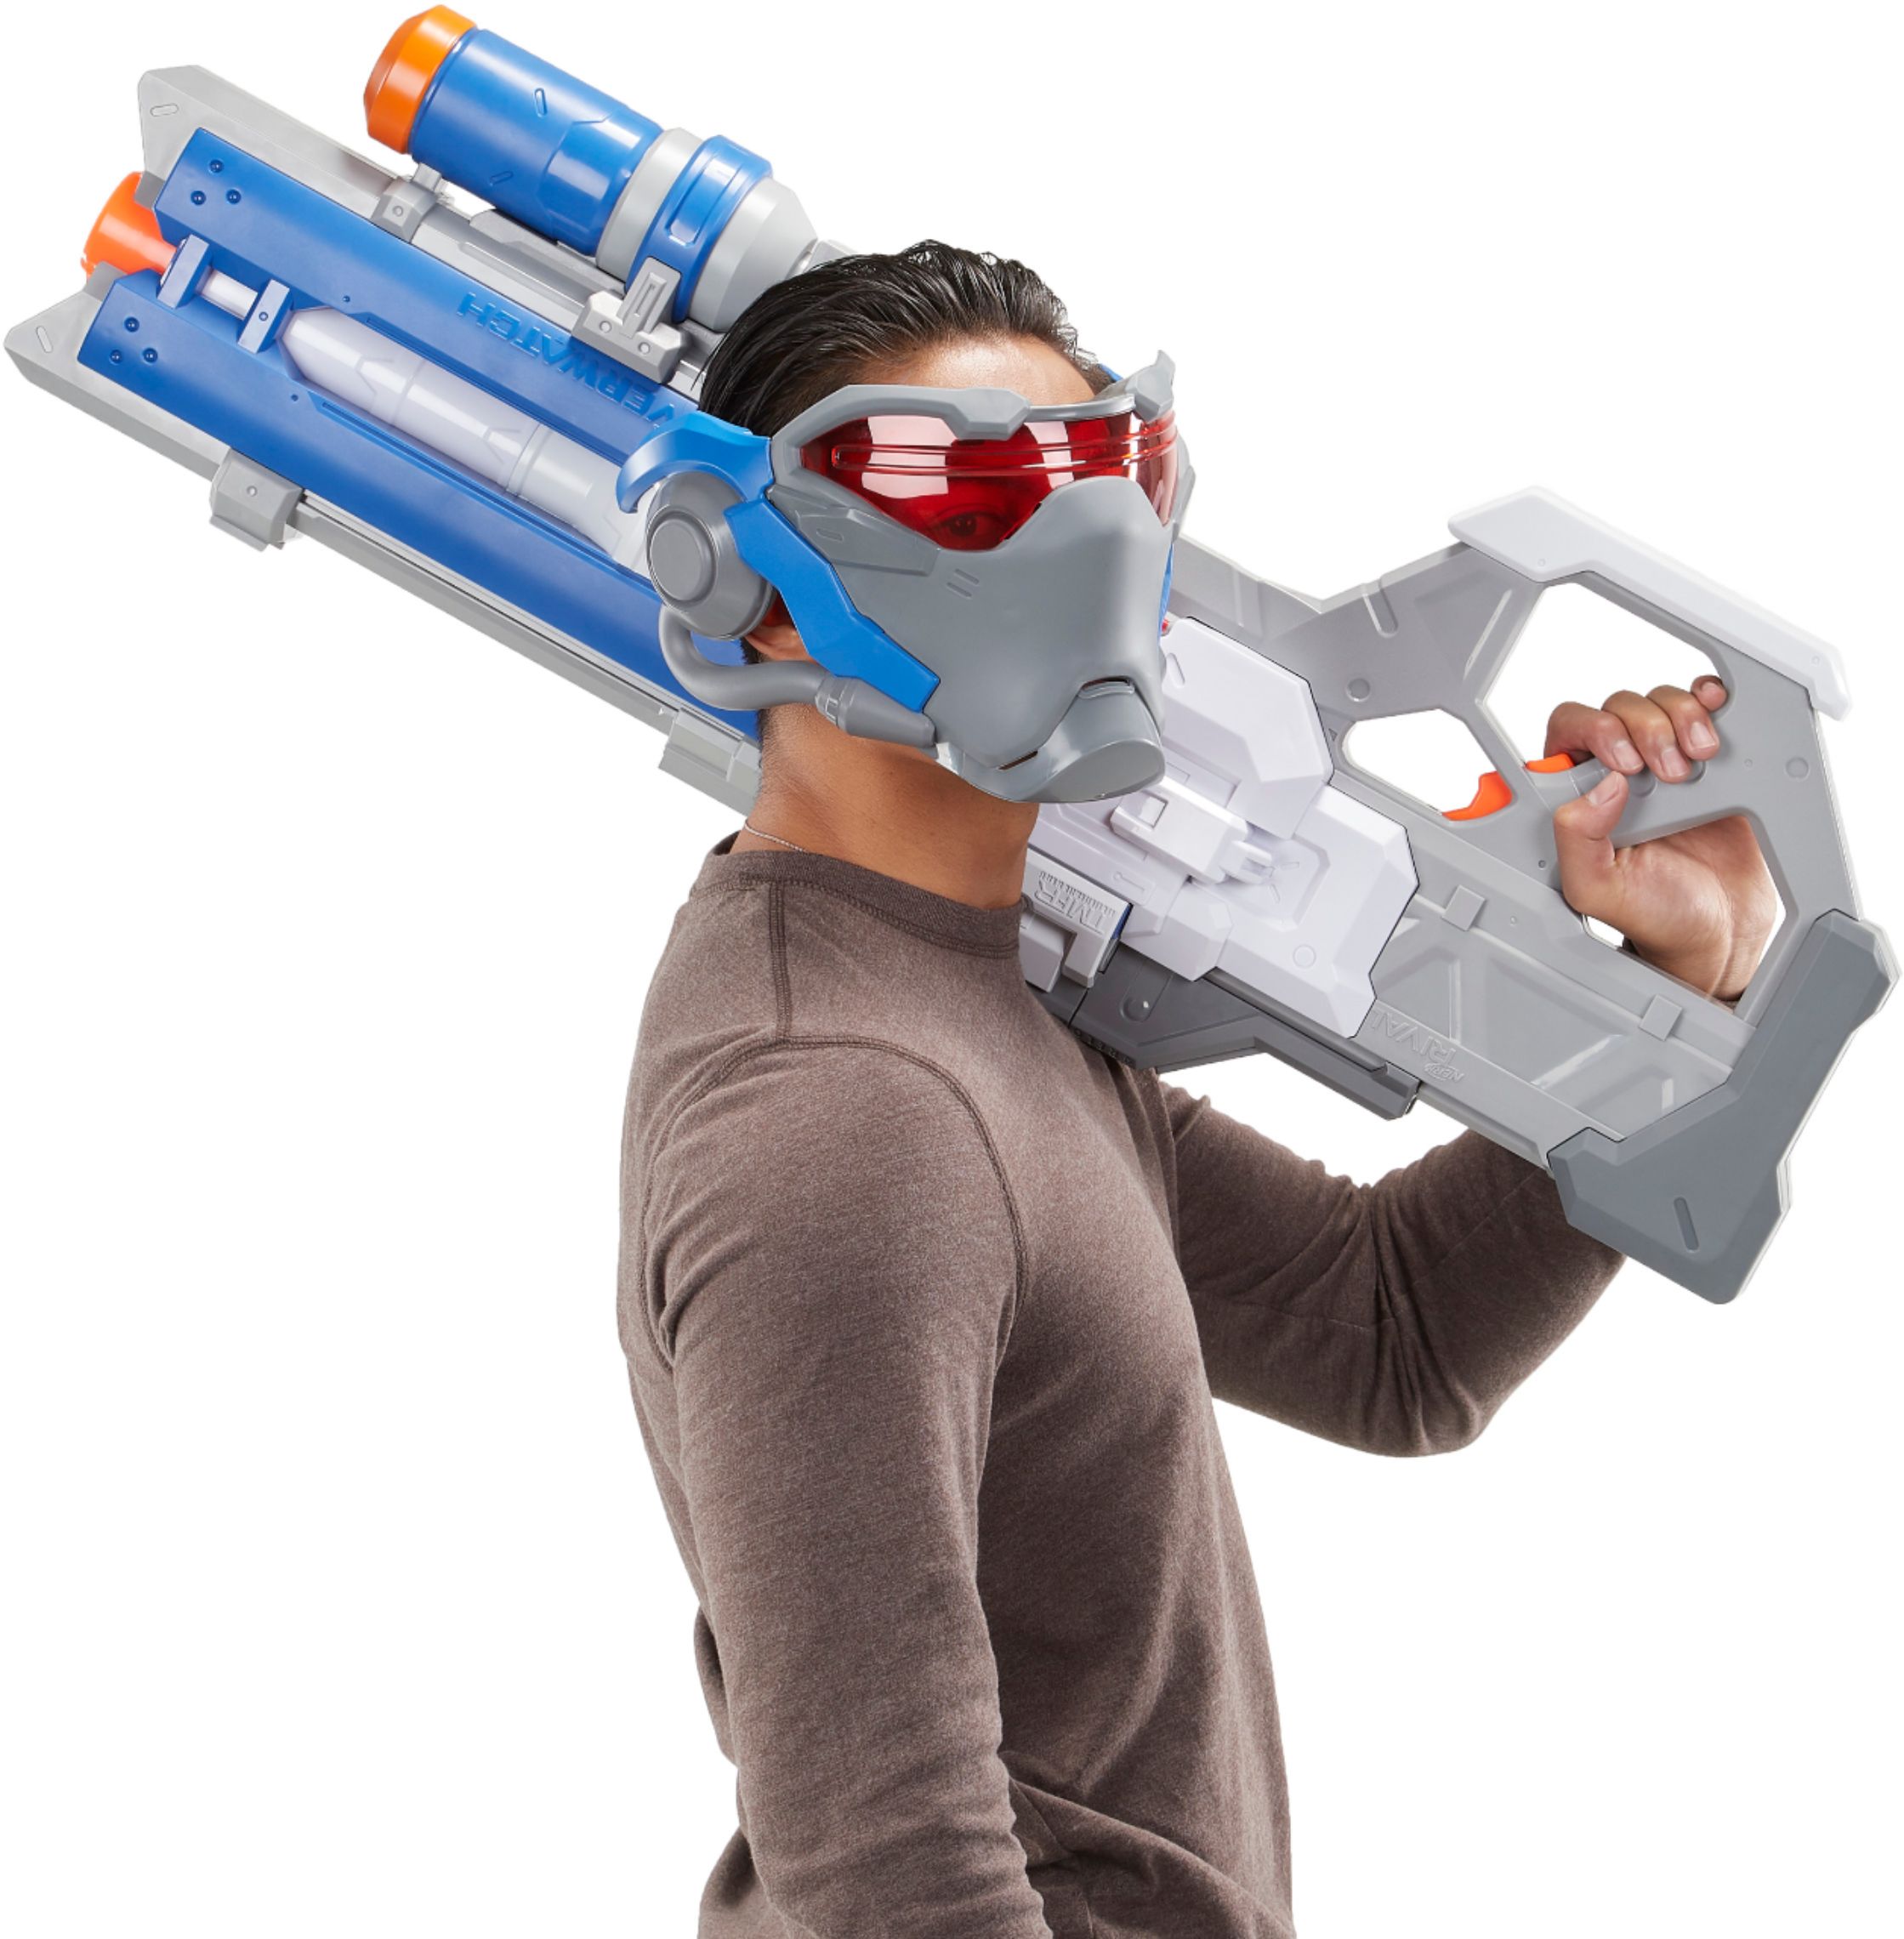 Nerf Rival Overwatch